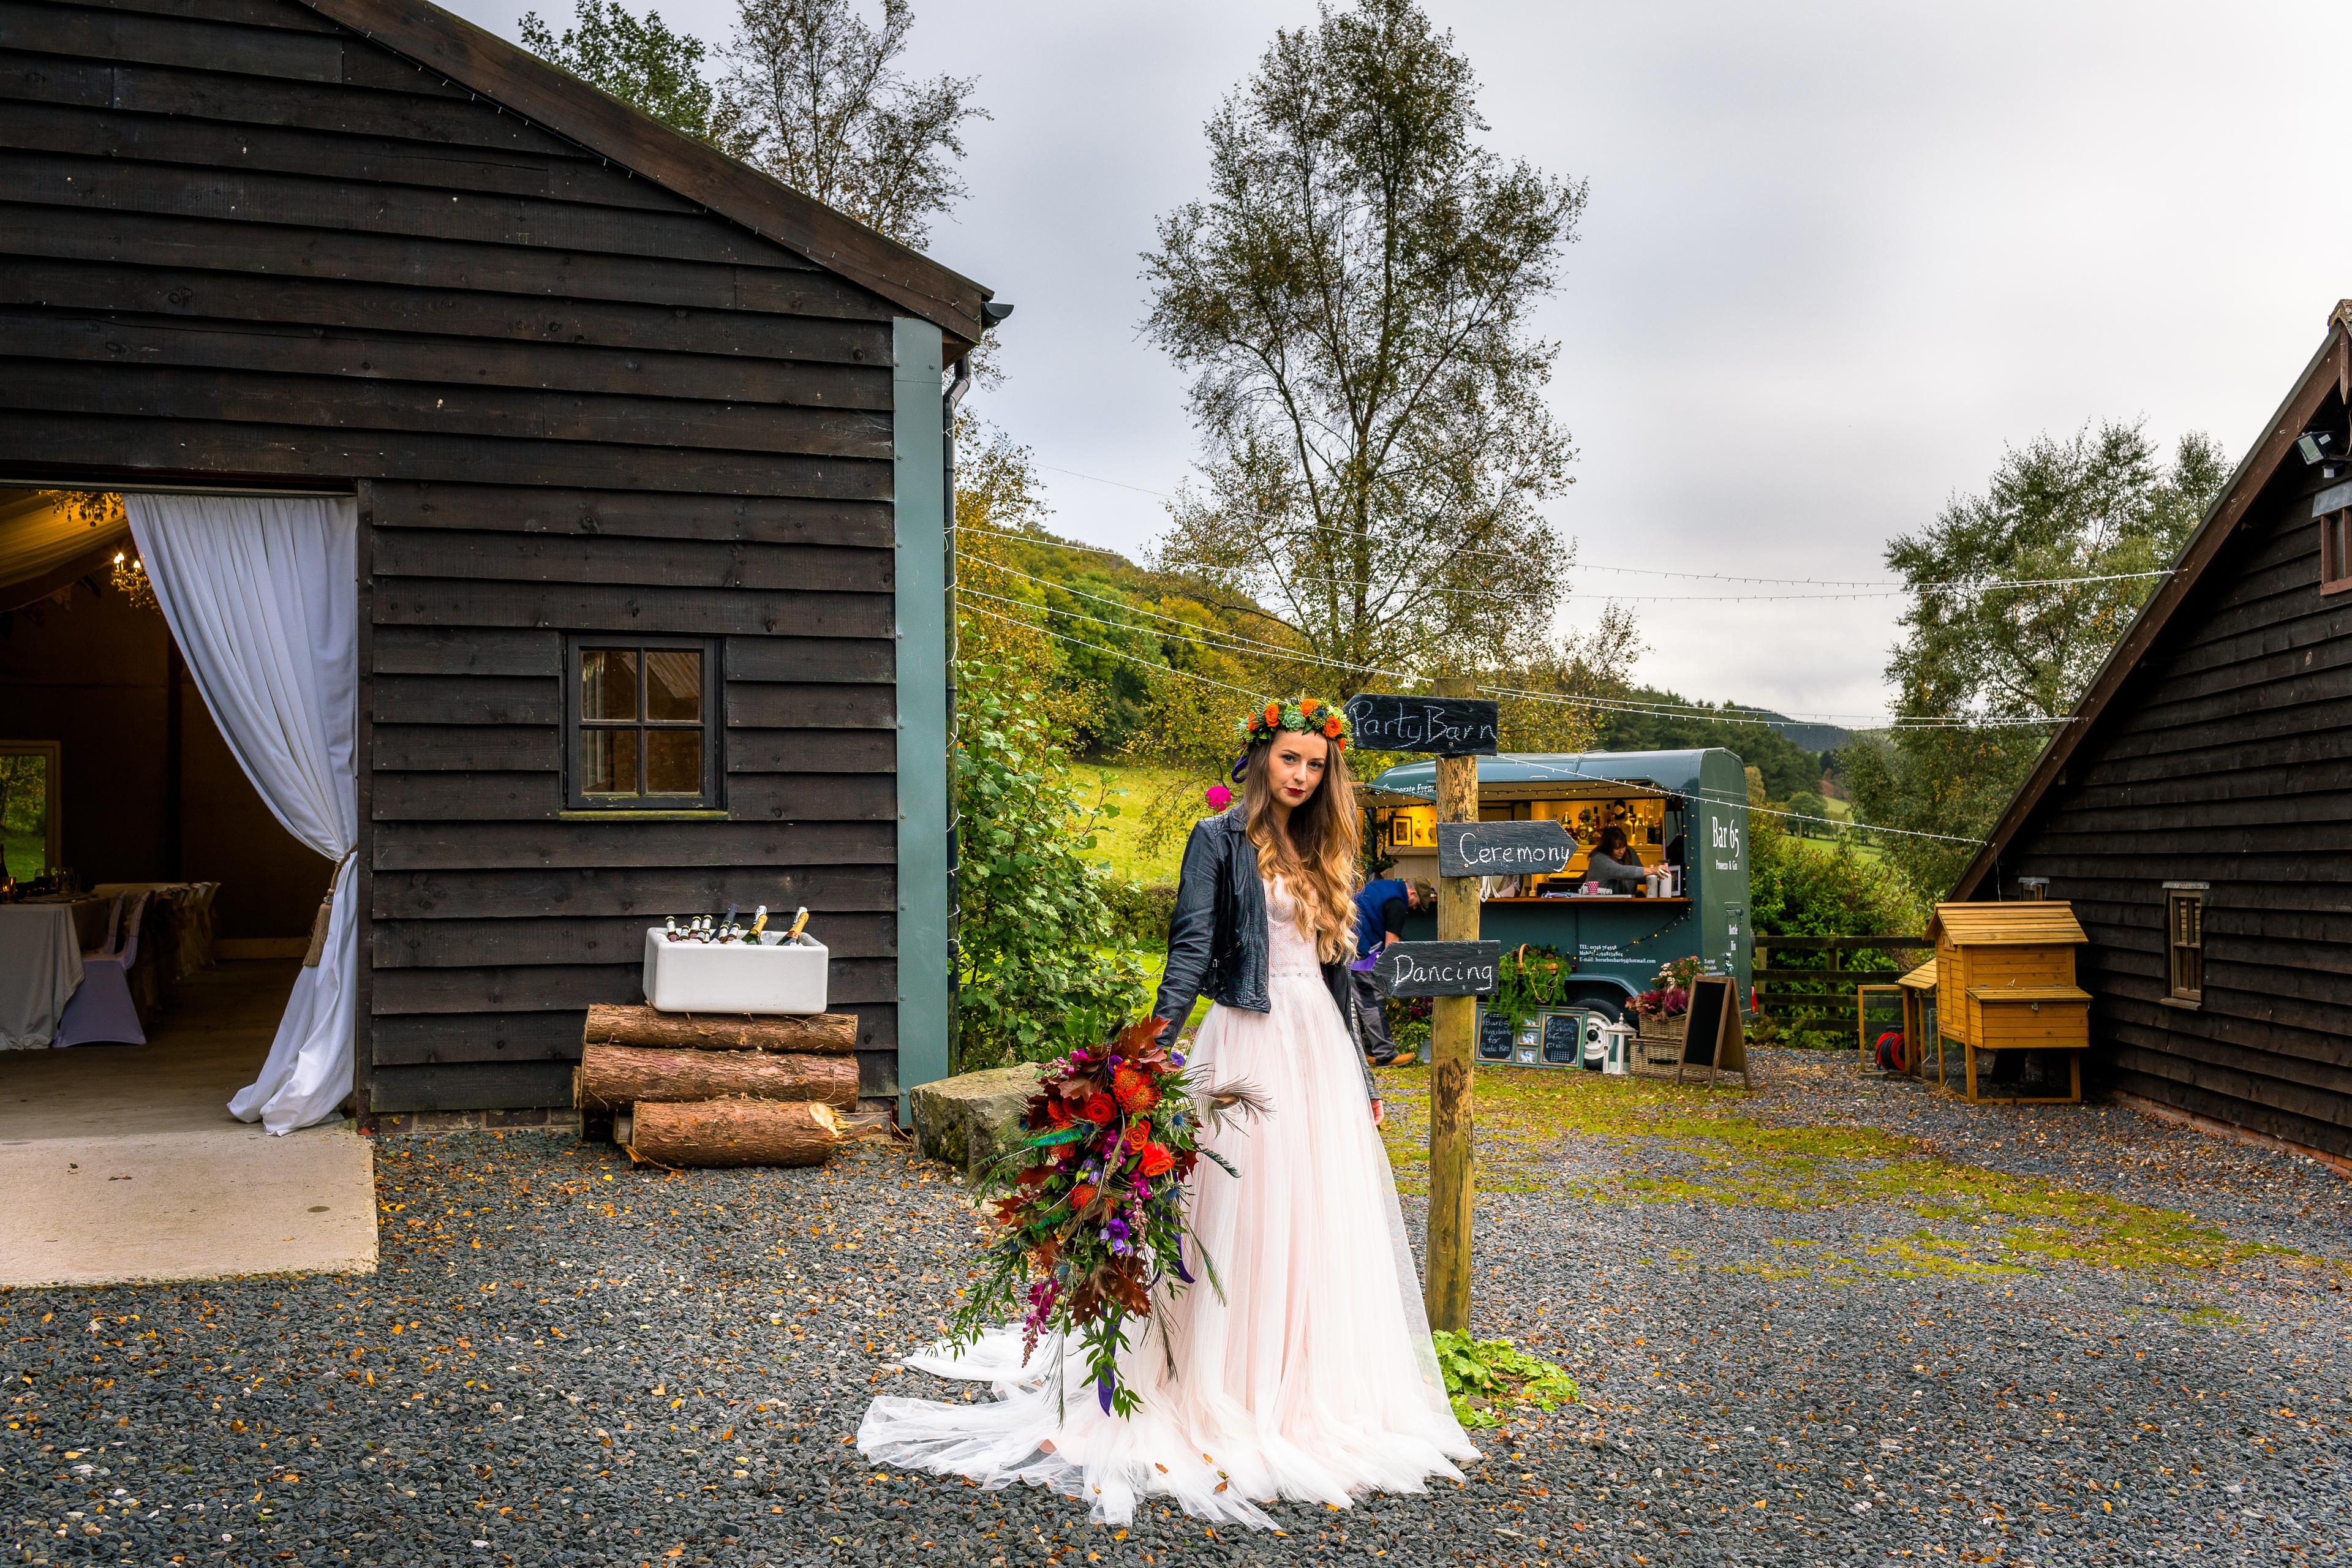 Exclusive Hire, Glyngynwydd Wedding Barn And Cottages photo #2